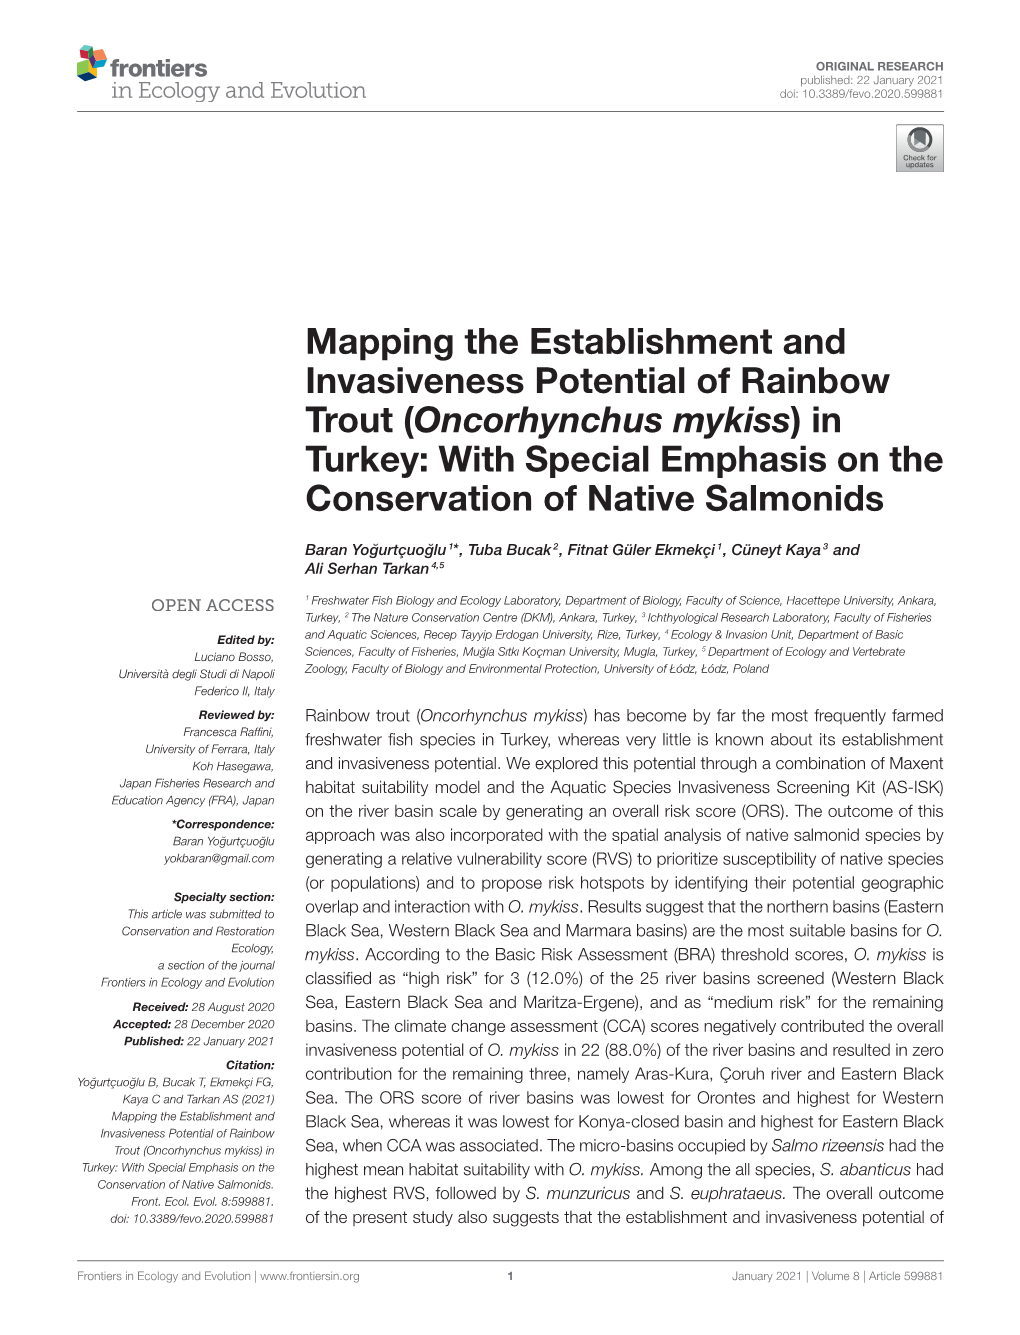 (Oncorhynchus Mykiss) in Turkey: with Special Emphasis on the Conservation of Native Salmonids